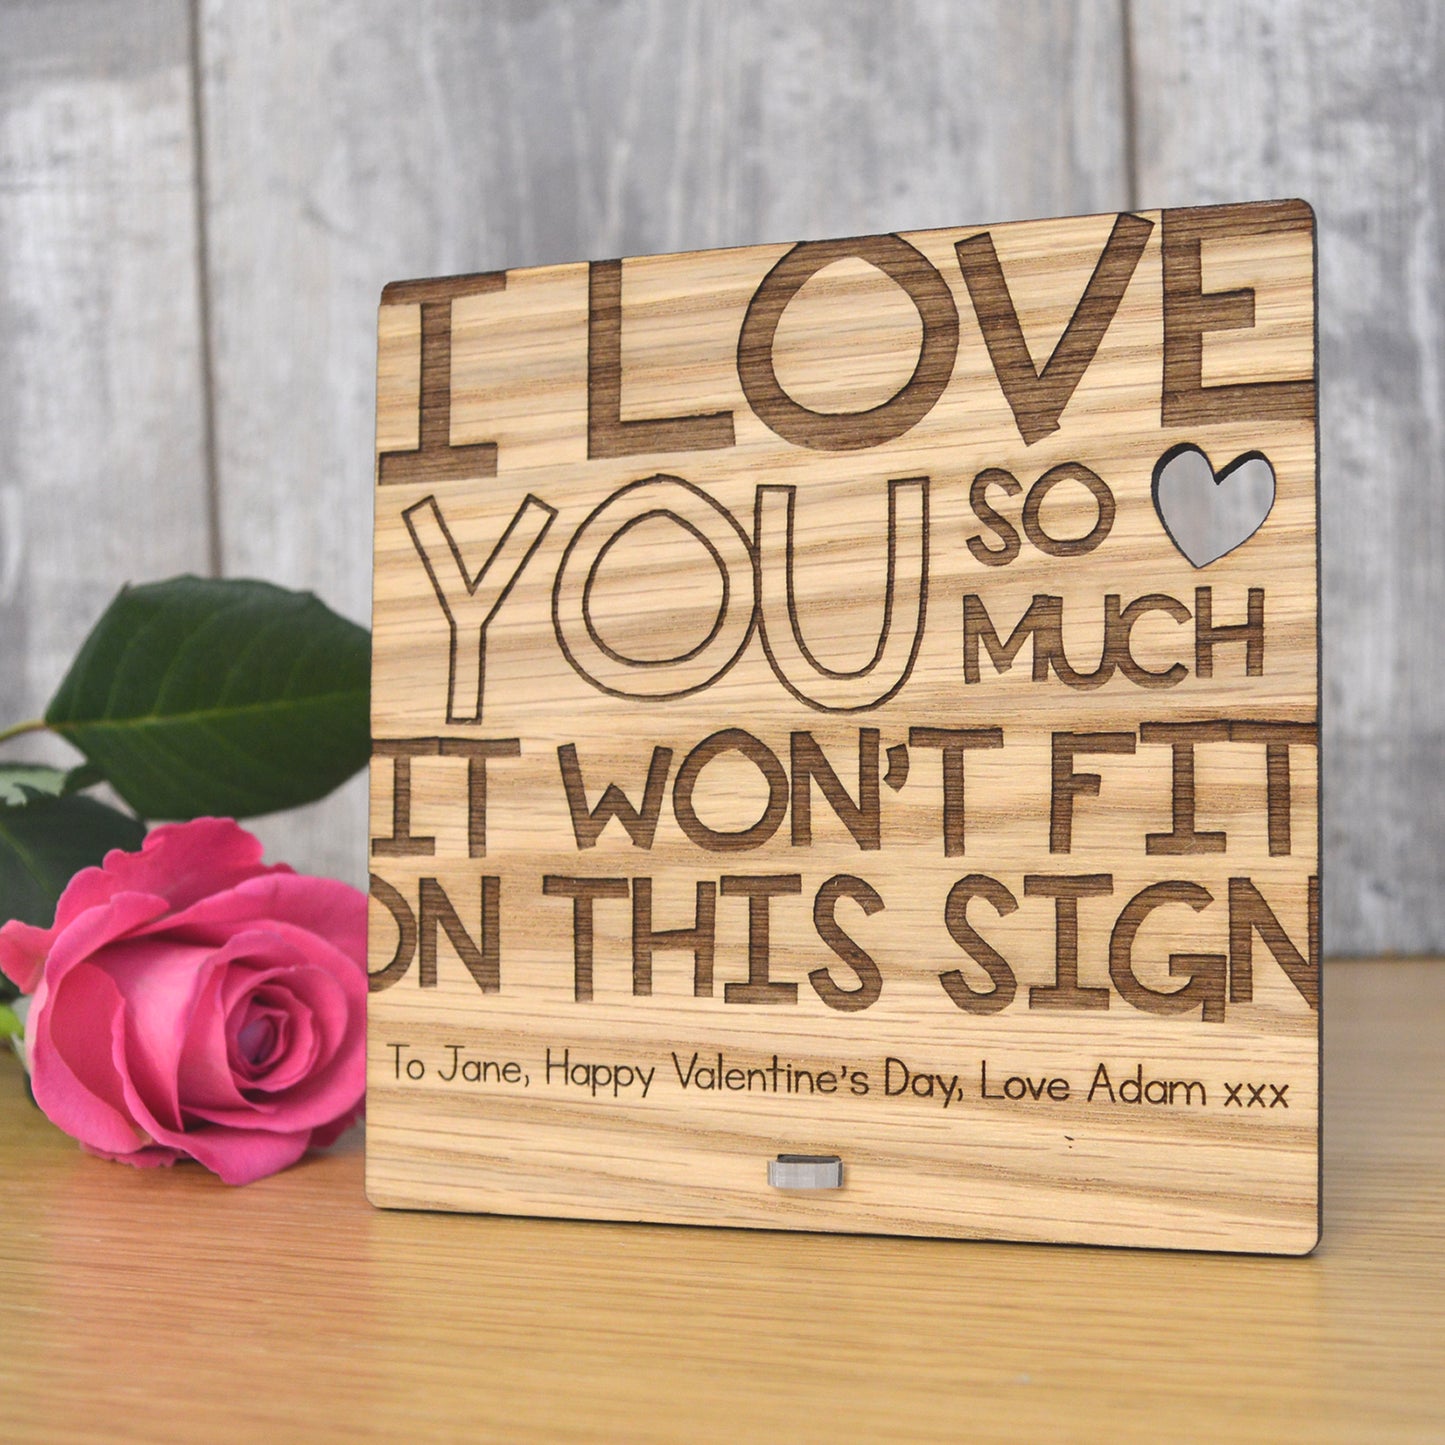 I Love You So Much It Won't Fit On This Sign - Funny Valentines Day Wooden Plaque